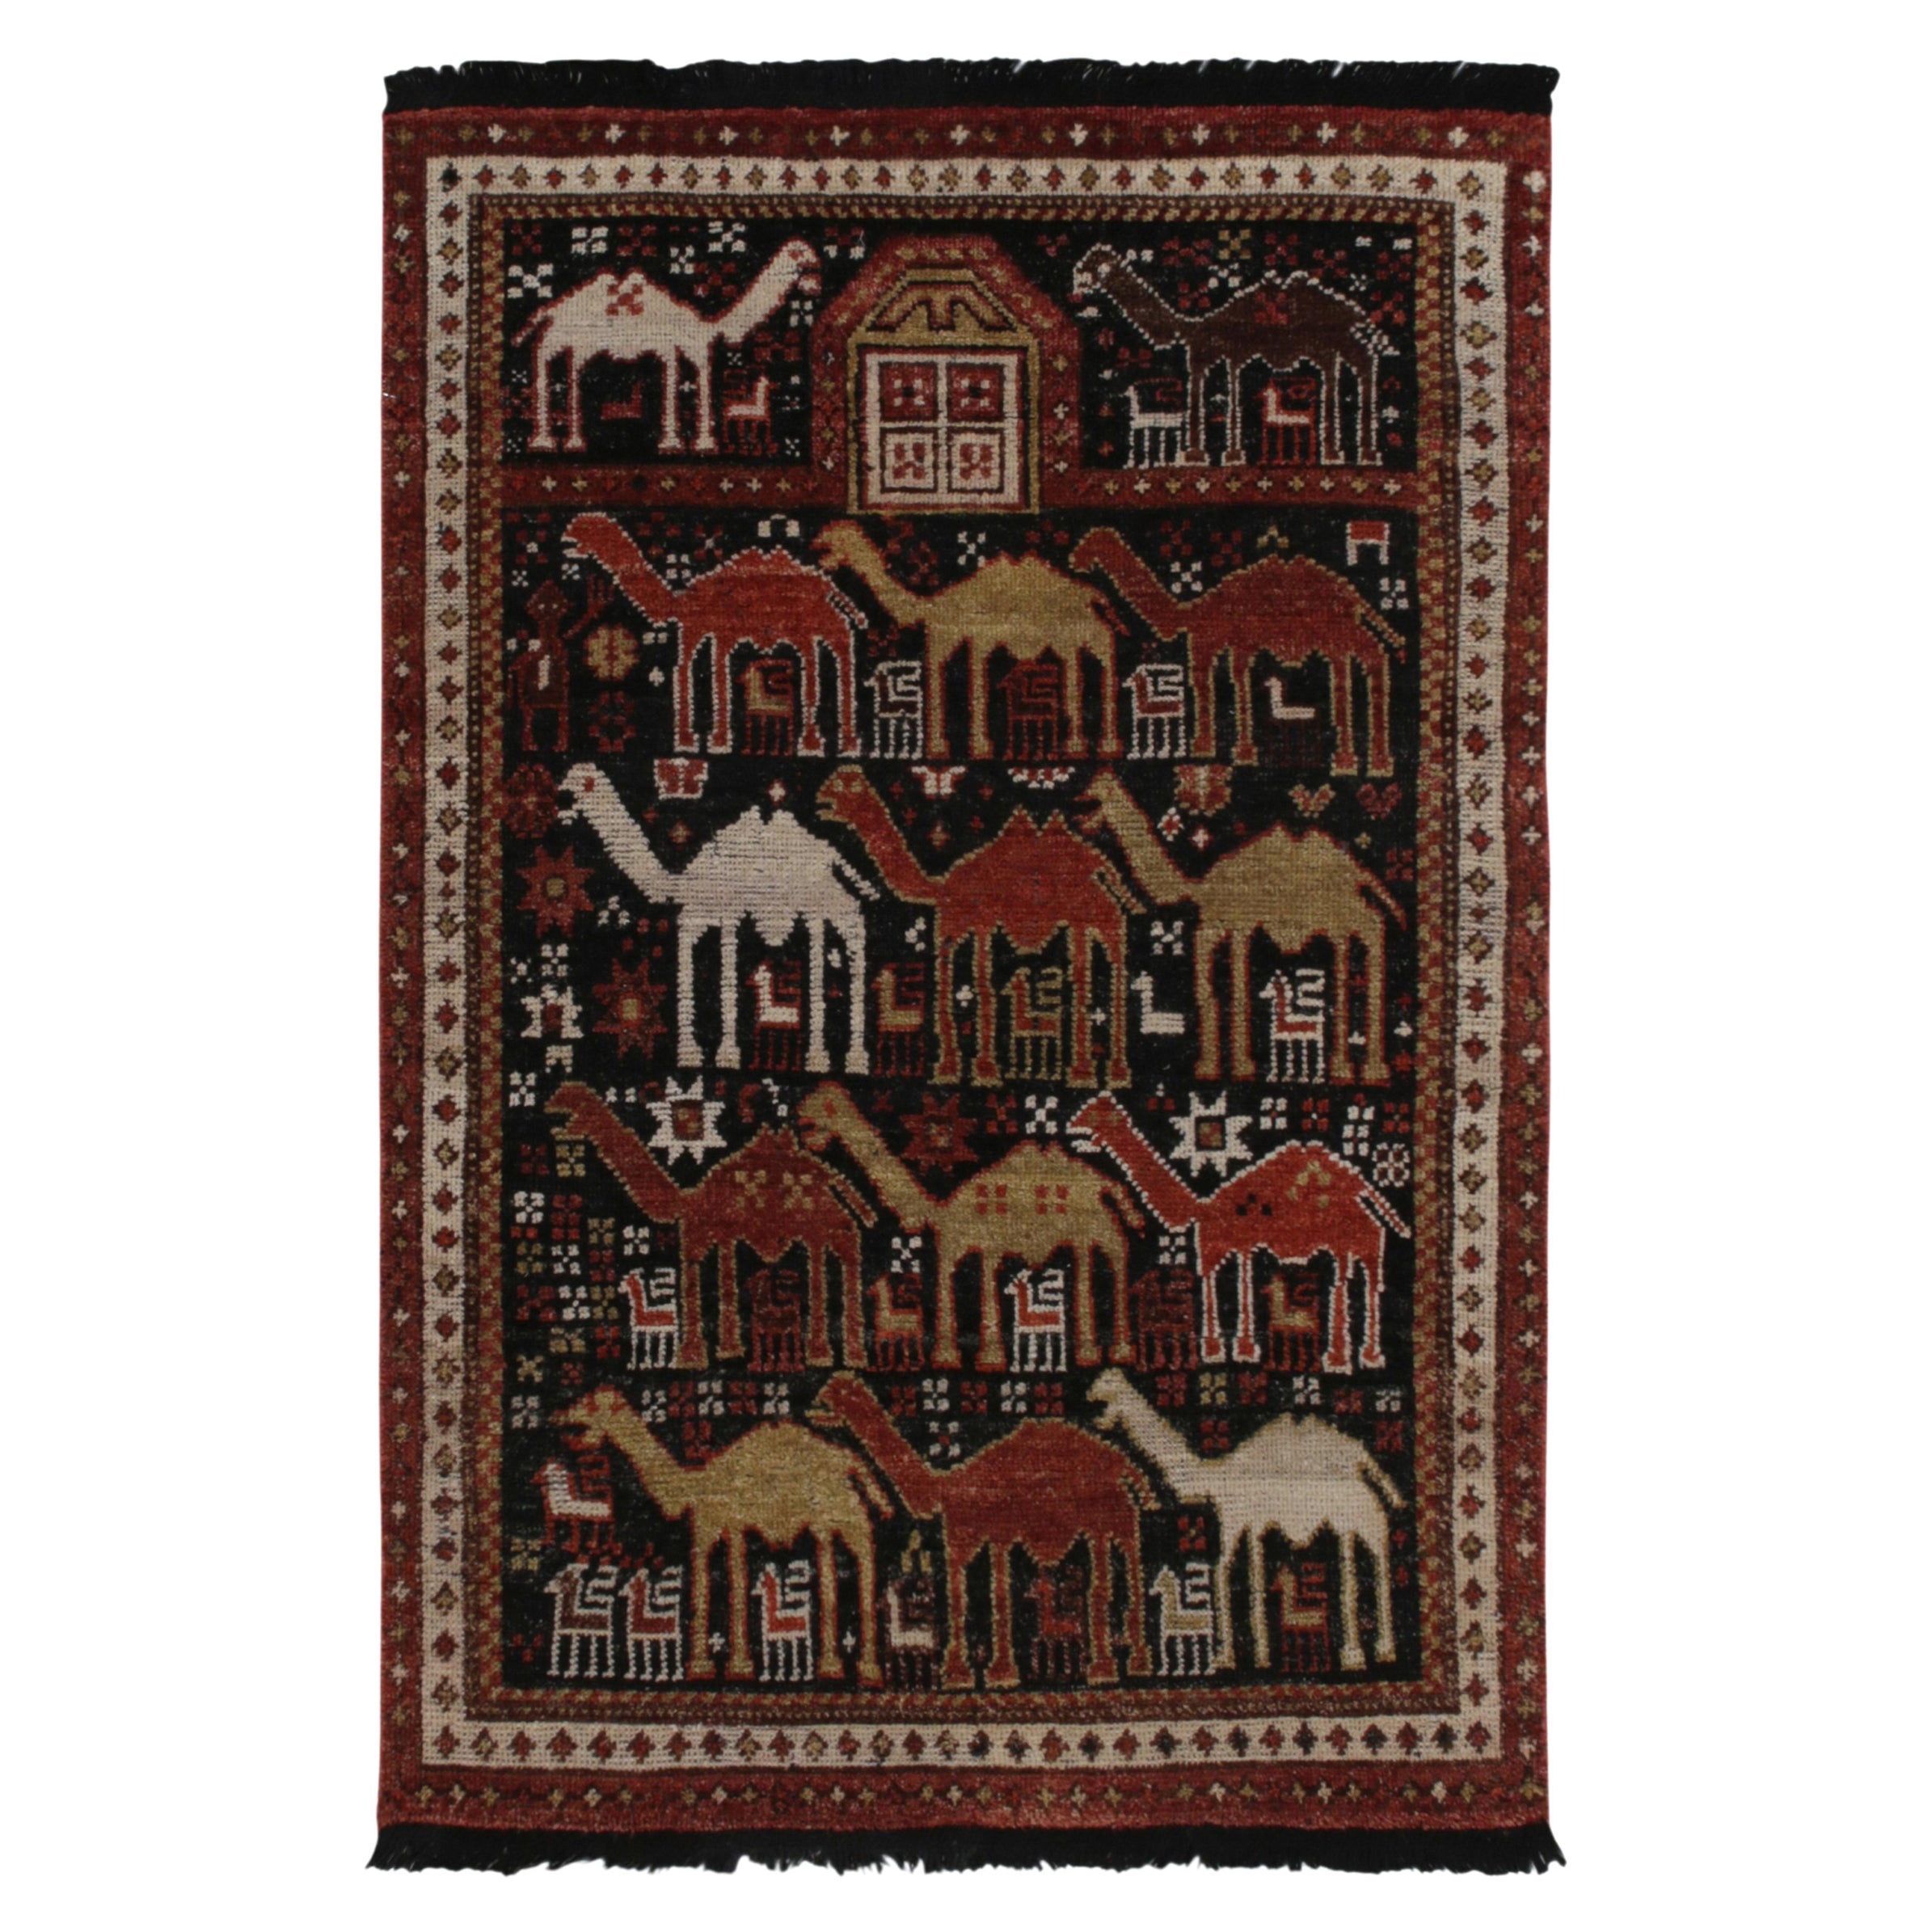 Rug & Kilim’s Shirvan Tribal Style Rug in Red, Orange & Brown Pictorial Patterns For Sale